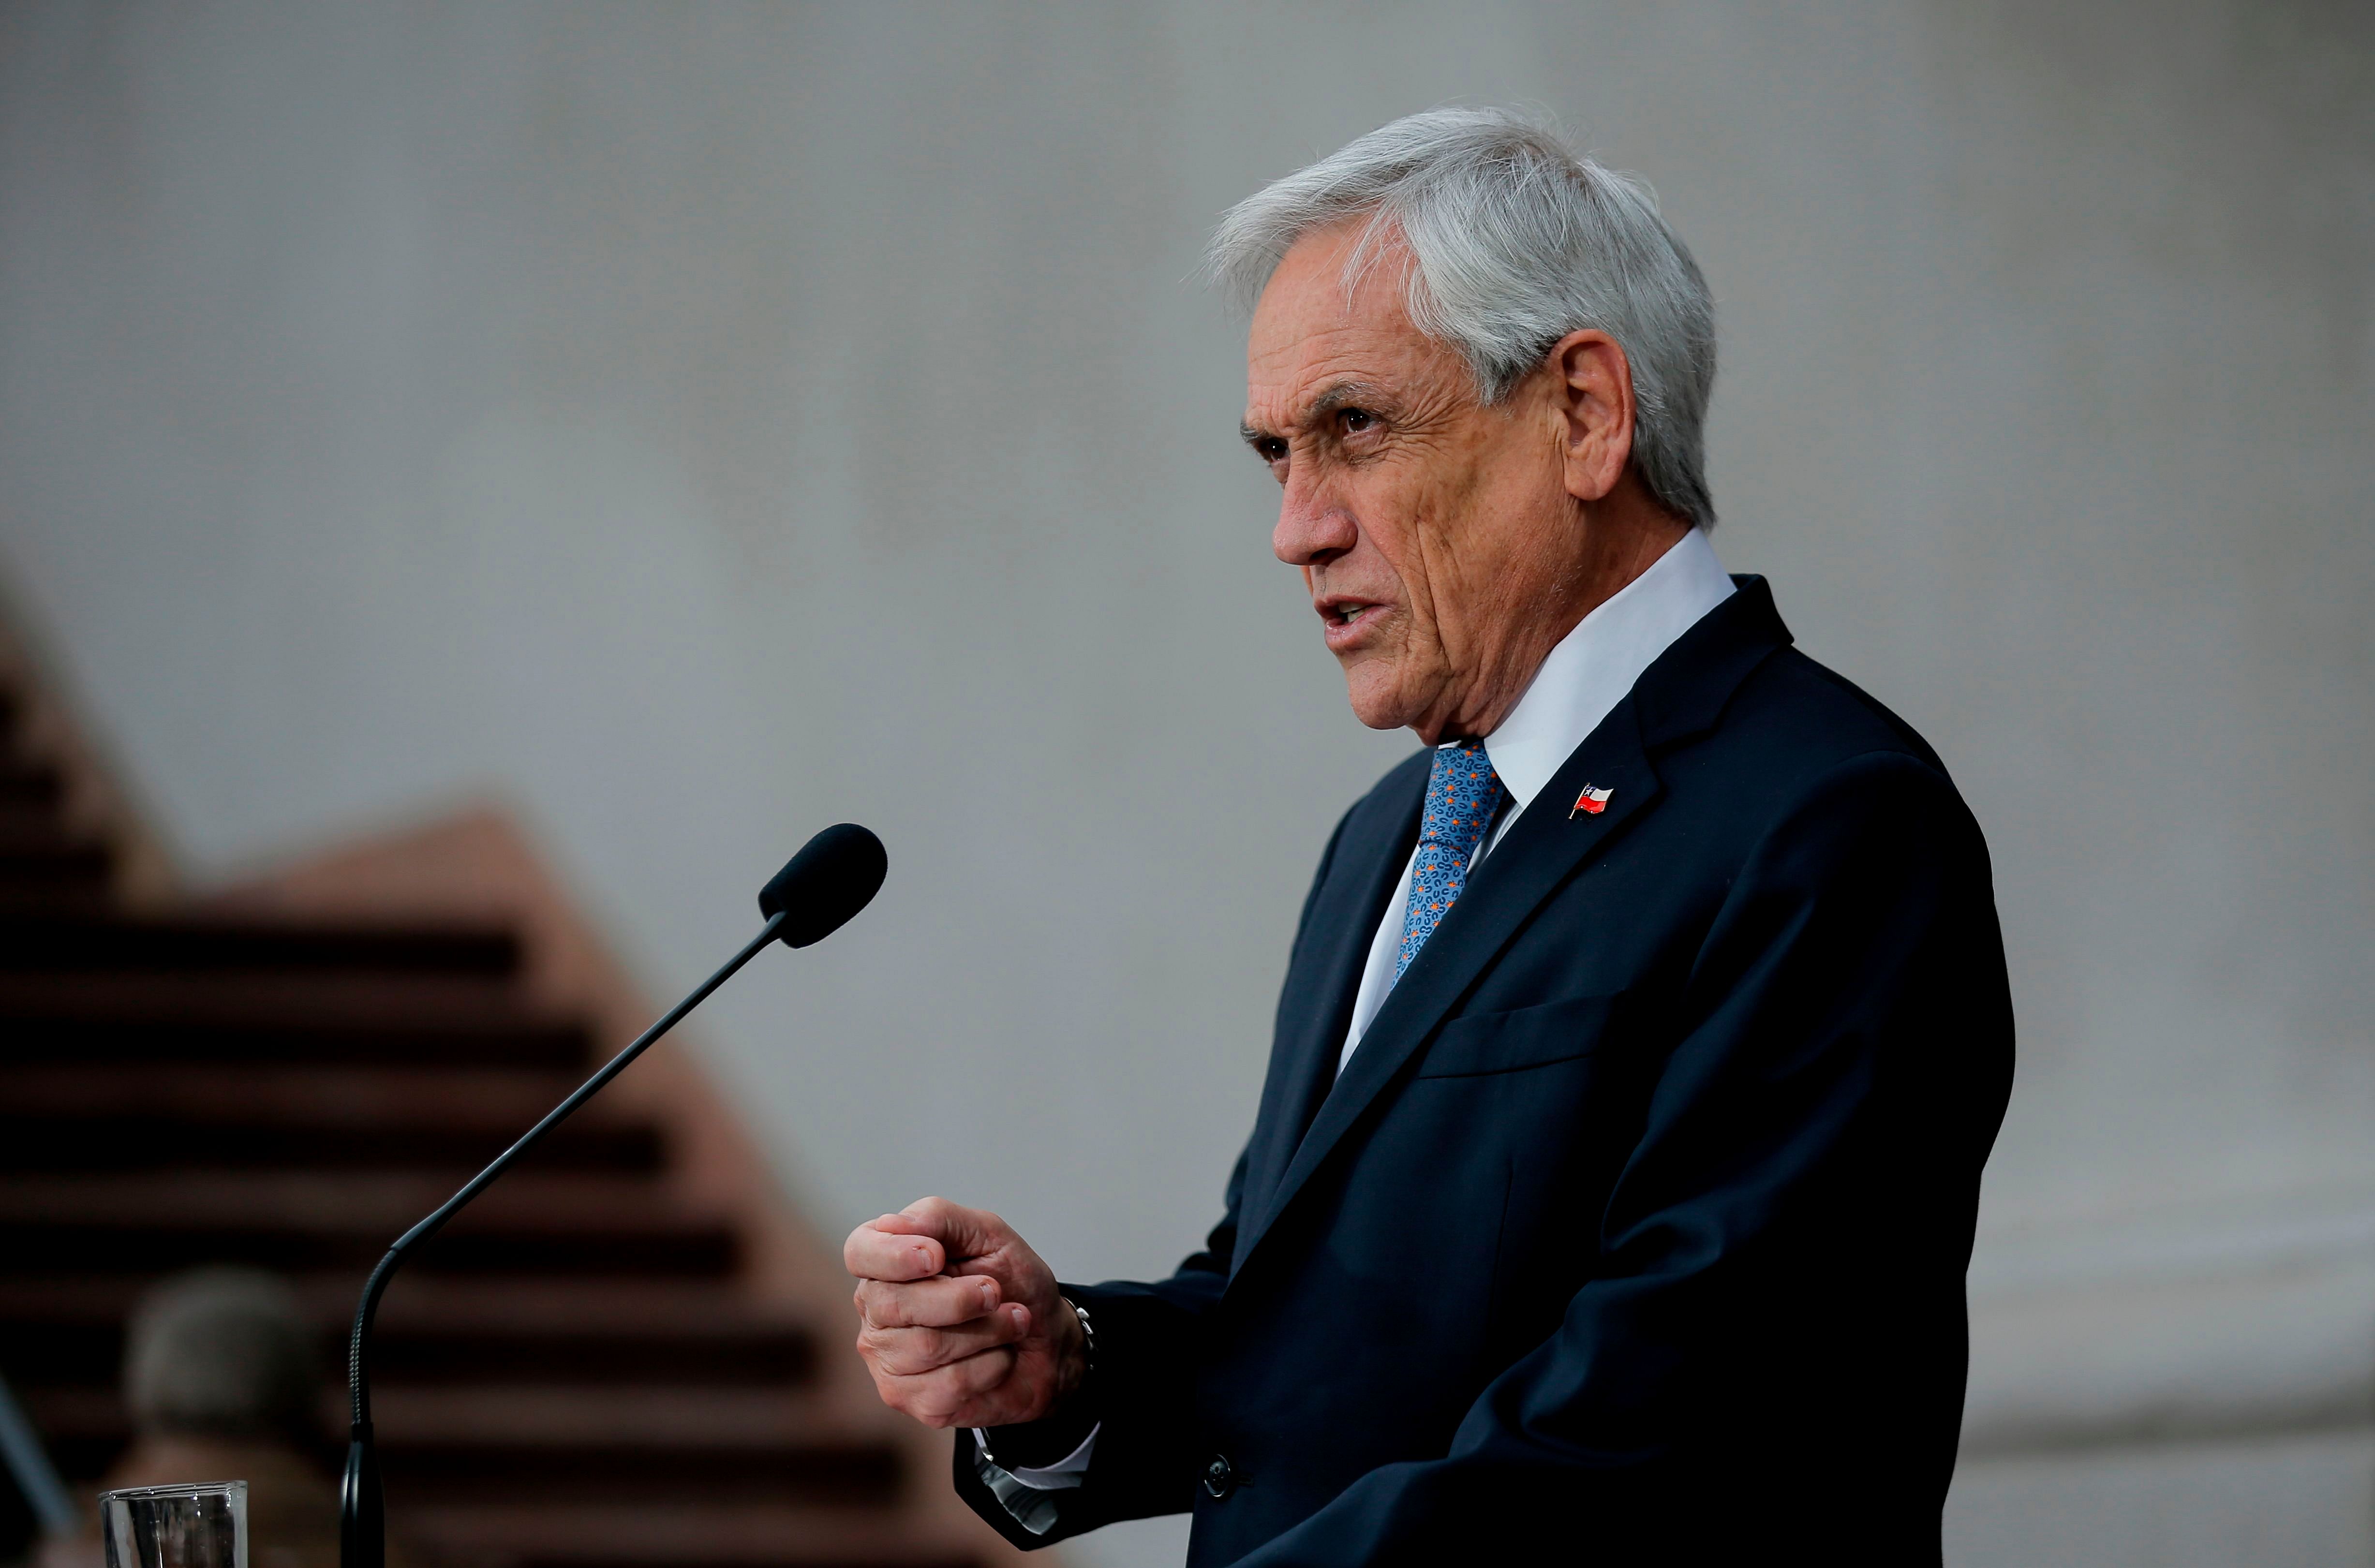 Chilean president Sebastian Pinera speaks during a press conference at La Moneda Presidential Palace in Santiago. (AFP Photo)